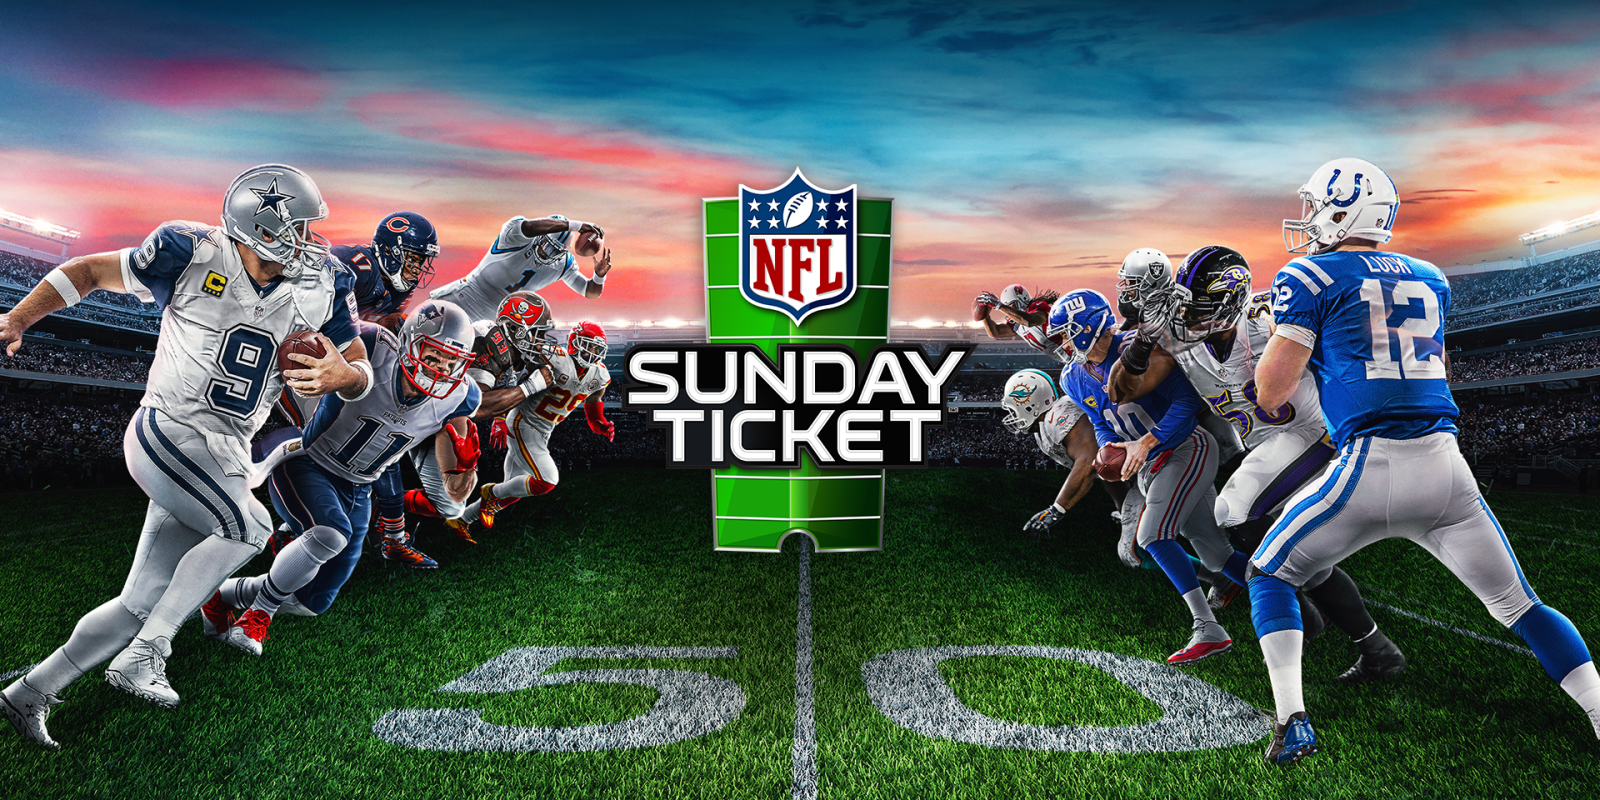 NFL Sunday Ticket returns with 50 discount for eligible students